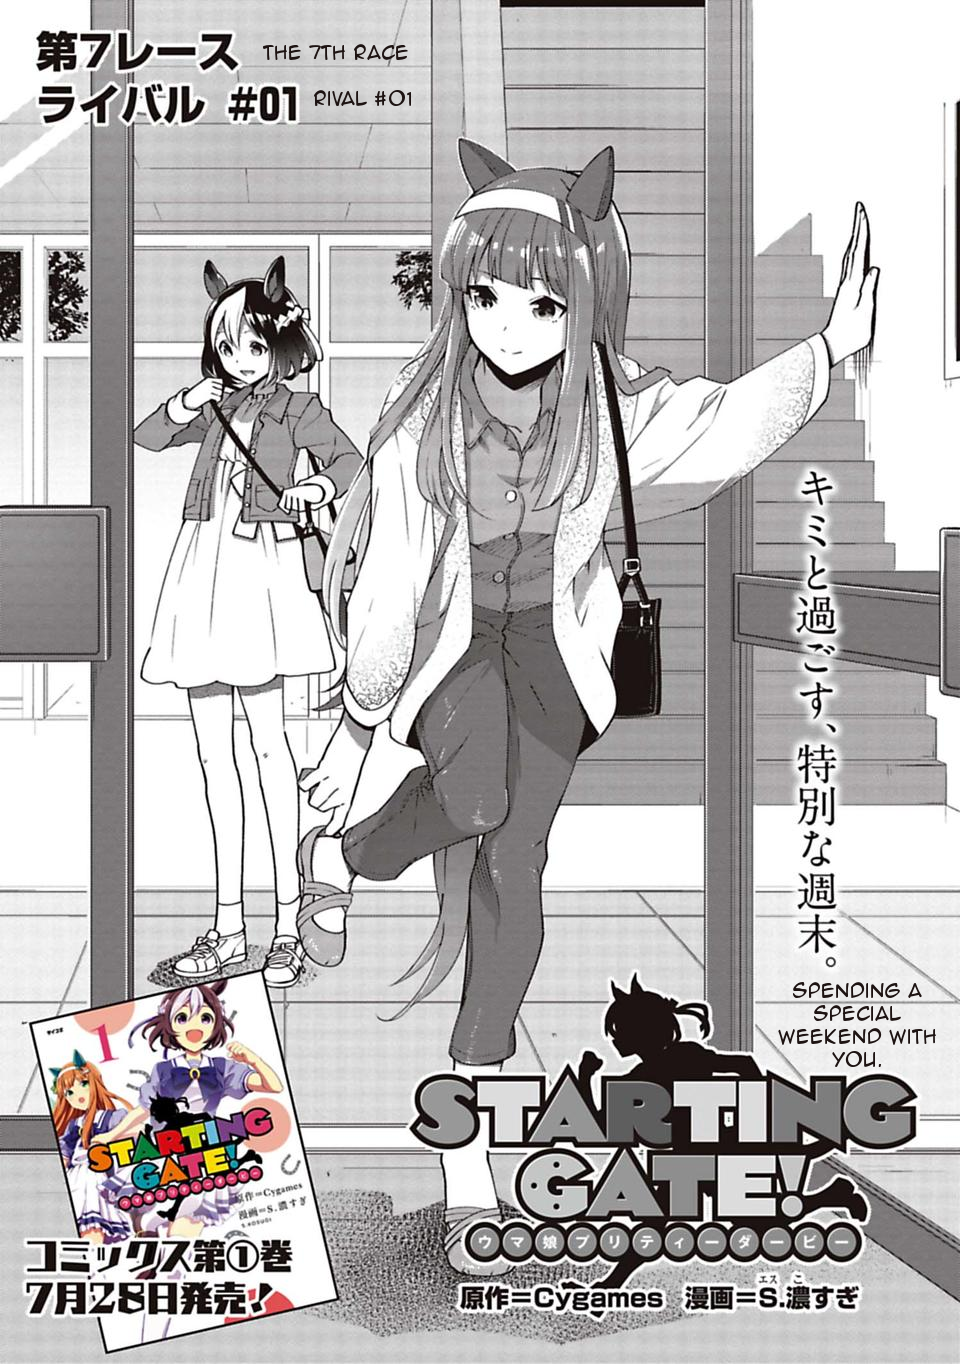 Starting Gate! Uma Musume Pretty Derby Vol.2 Chapter 7: Rivals 1 - Picture 1